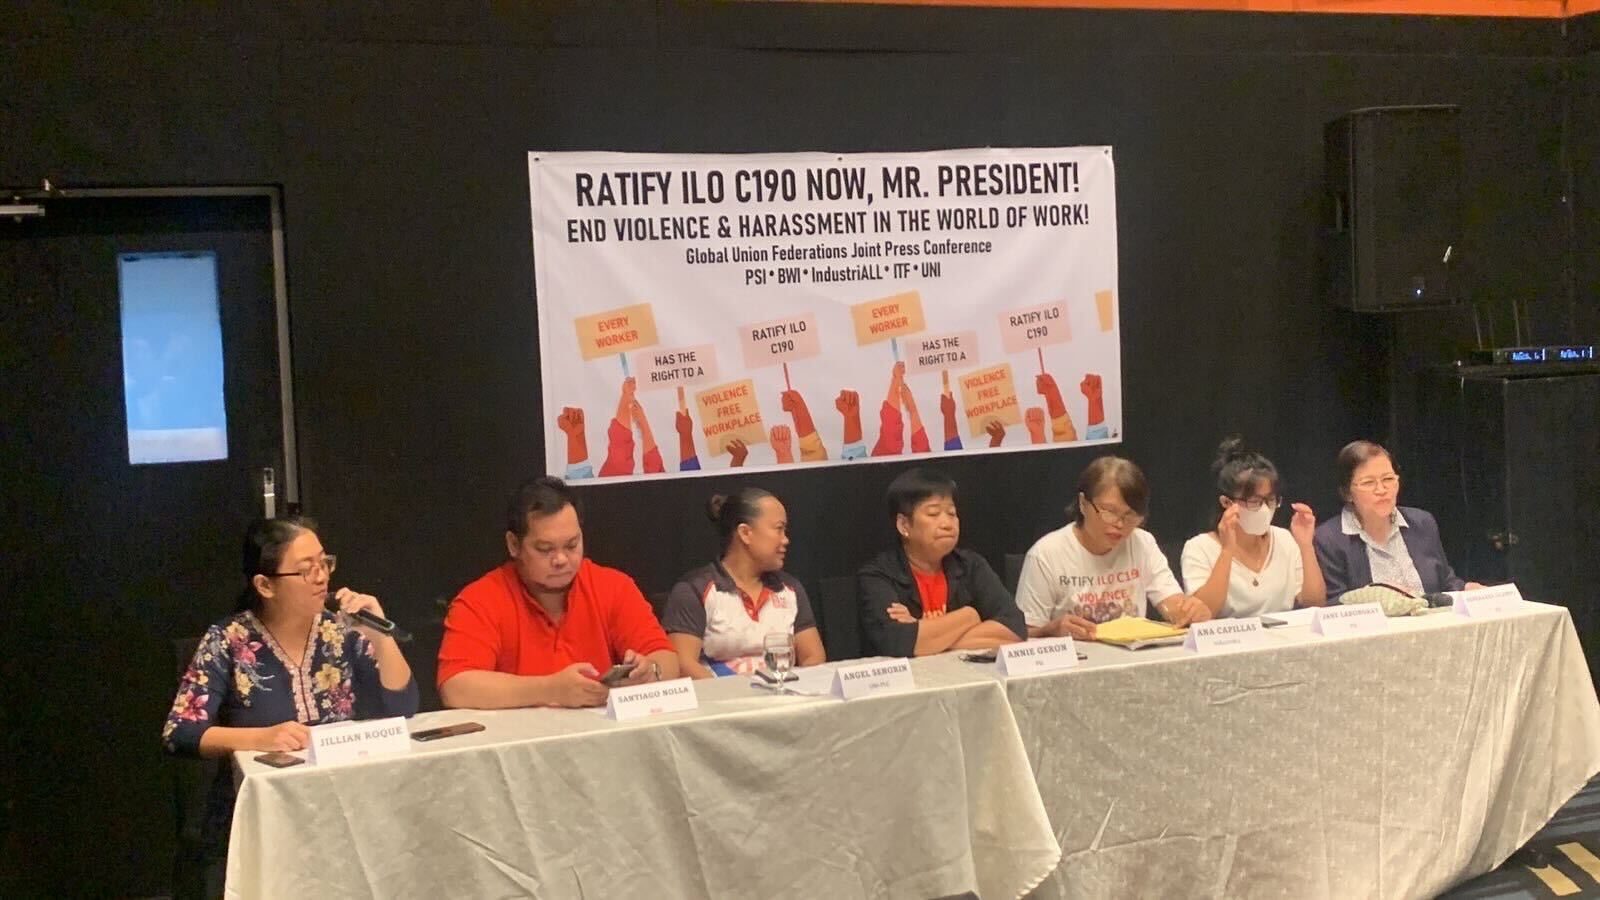 Groups urge PH to ratify ILO convention on ending workplace violence, harassment